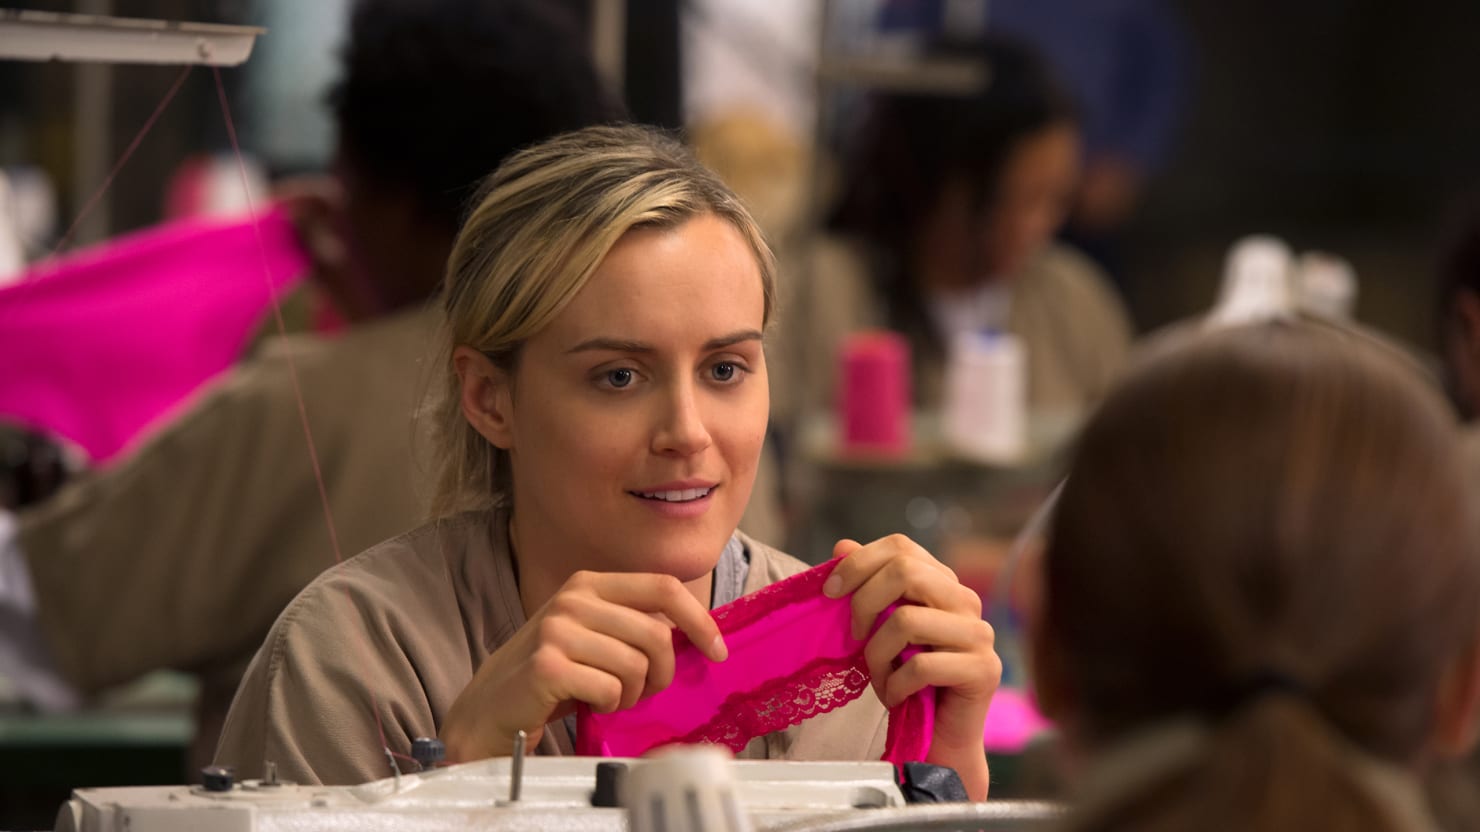 OITNB's Used-Panty Business Is Real: The Shocking True Story Behind the  Show's Prison Panty Ring